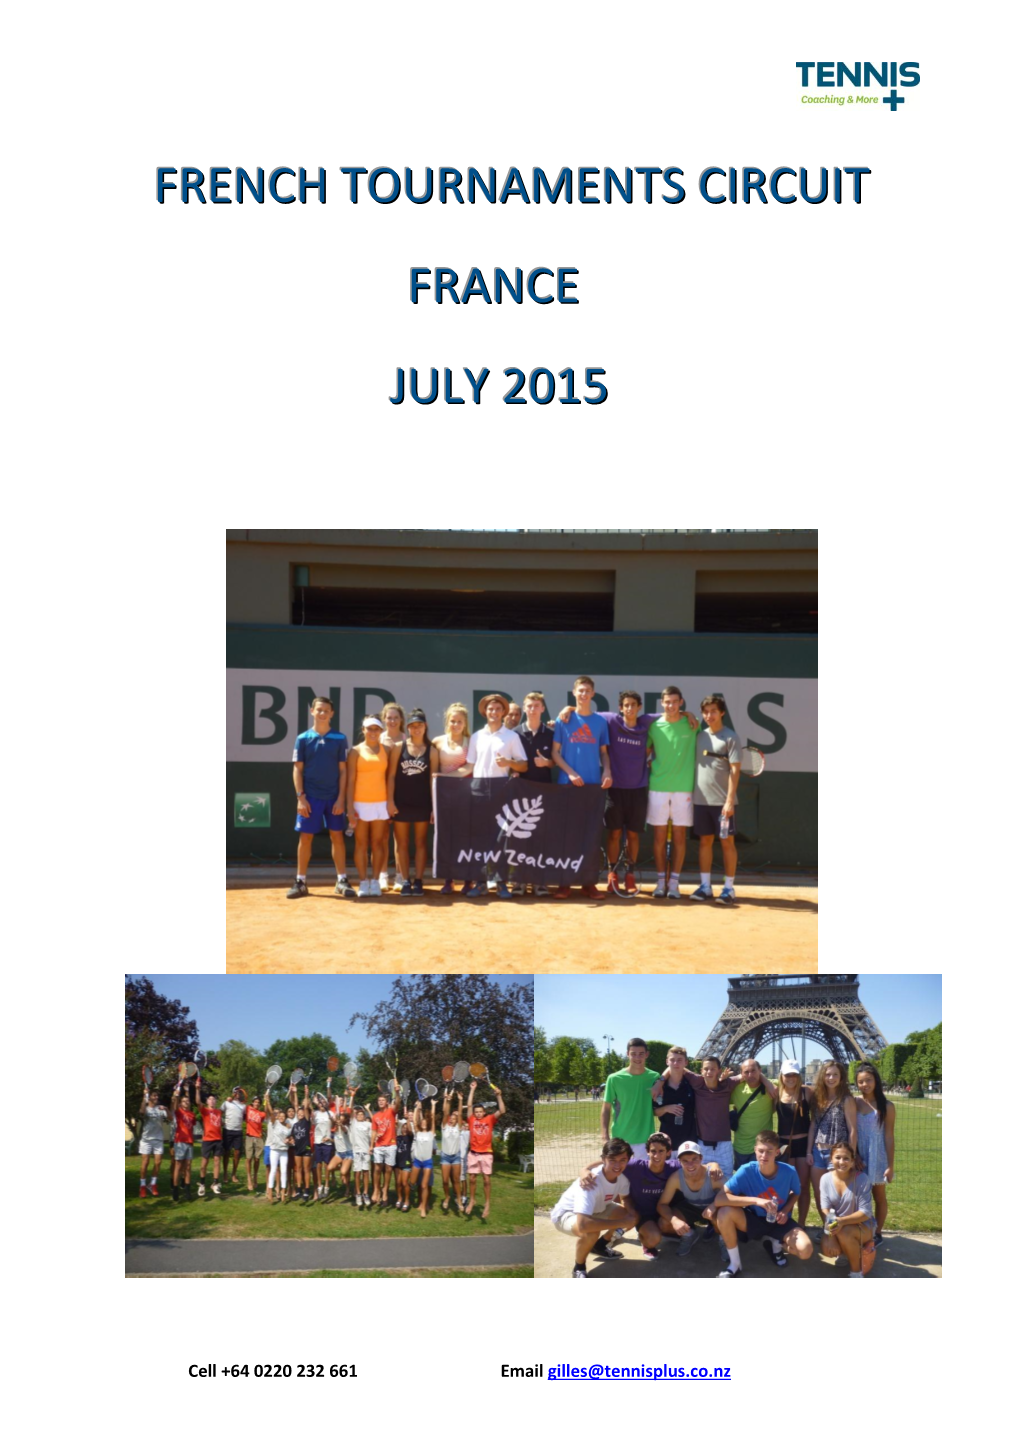 French Tournaments Circuit France July 2015